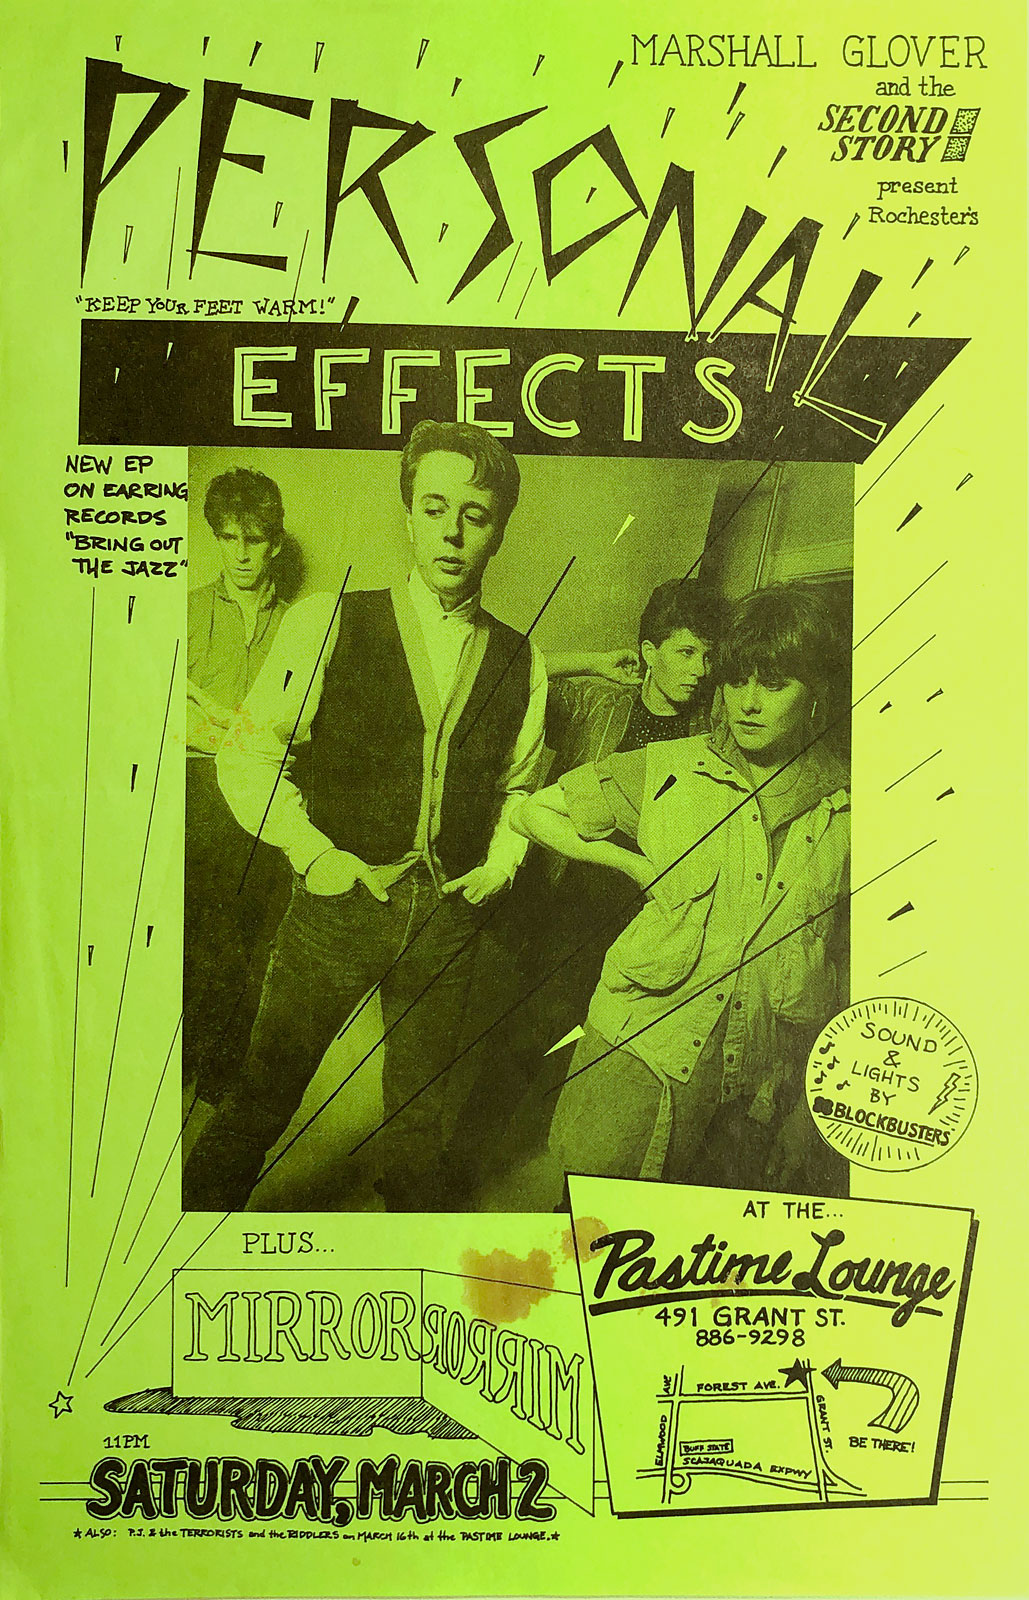 Poster for Personal Effects at the Pastime Lounge in Buffalo, New York on 03.02.1985